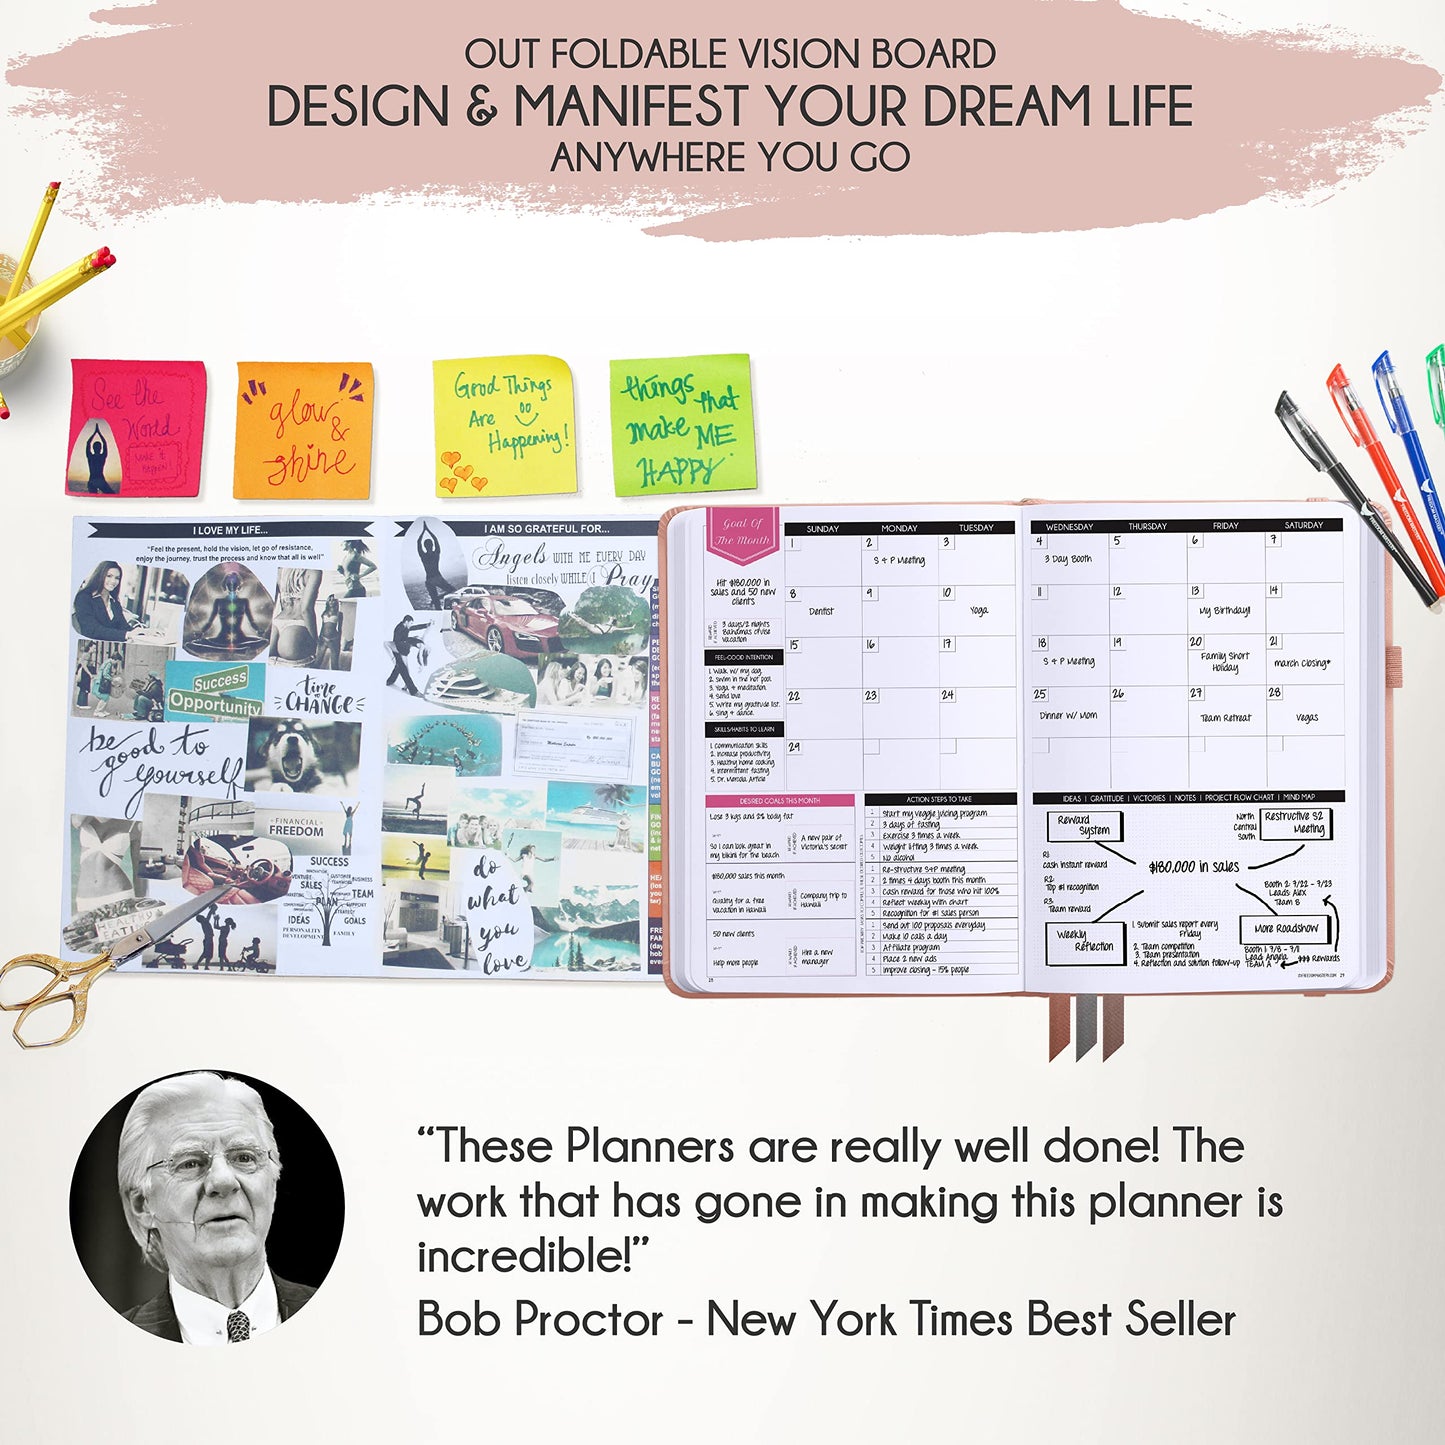 Life Planner - Undated Deluxe Weekly, Monthly Planner, a 12 Month Journey to Increase Productivity & Happiness, Life Organizer, Gratitude Journal, Law of Attraction Planner - Start Anytime